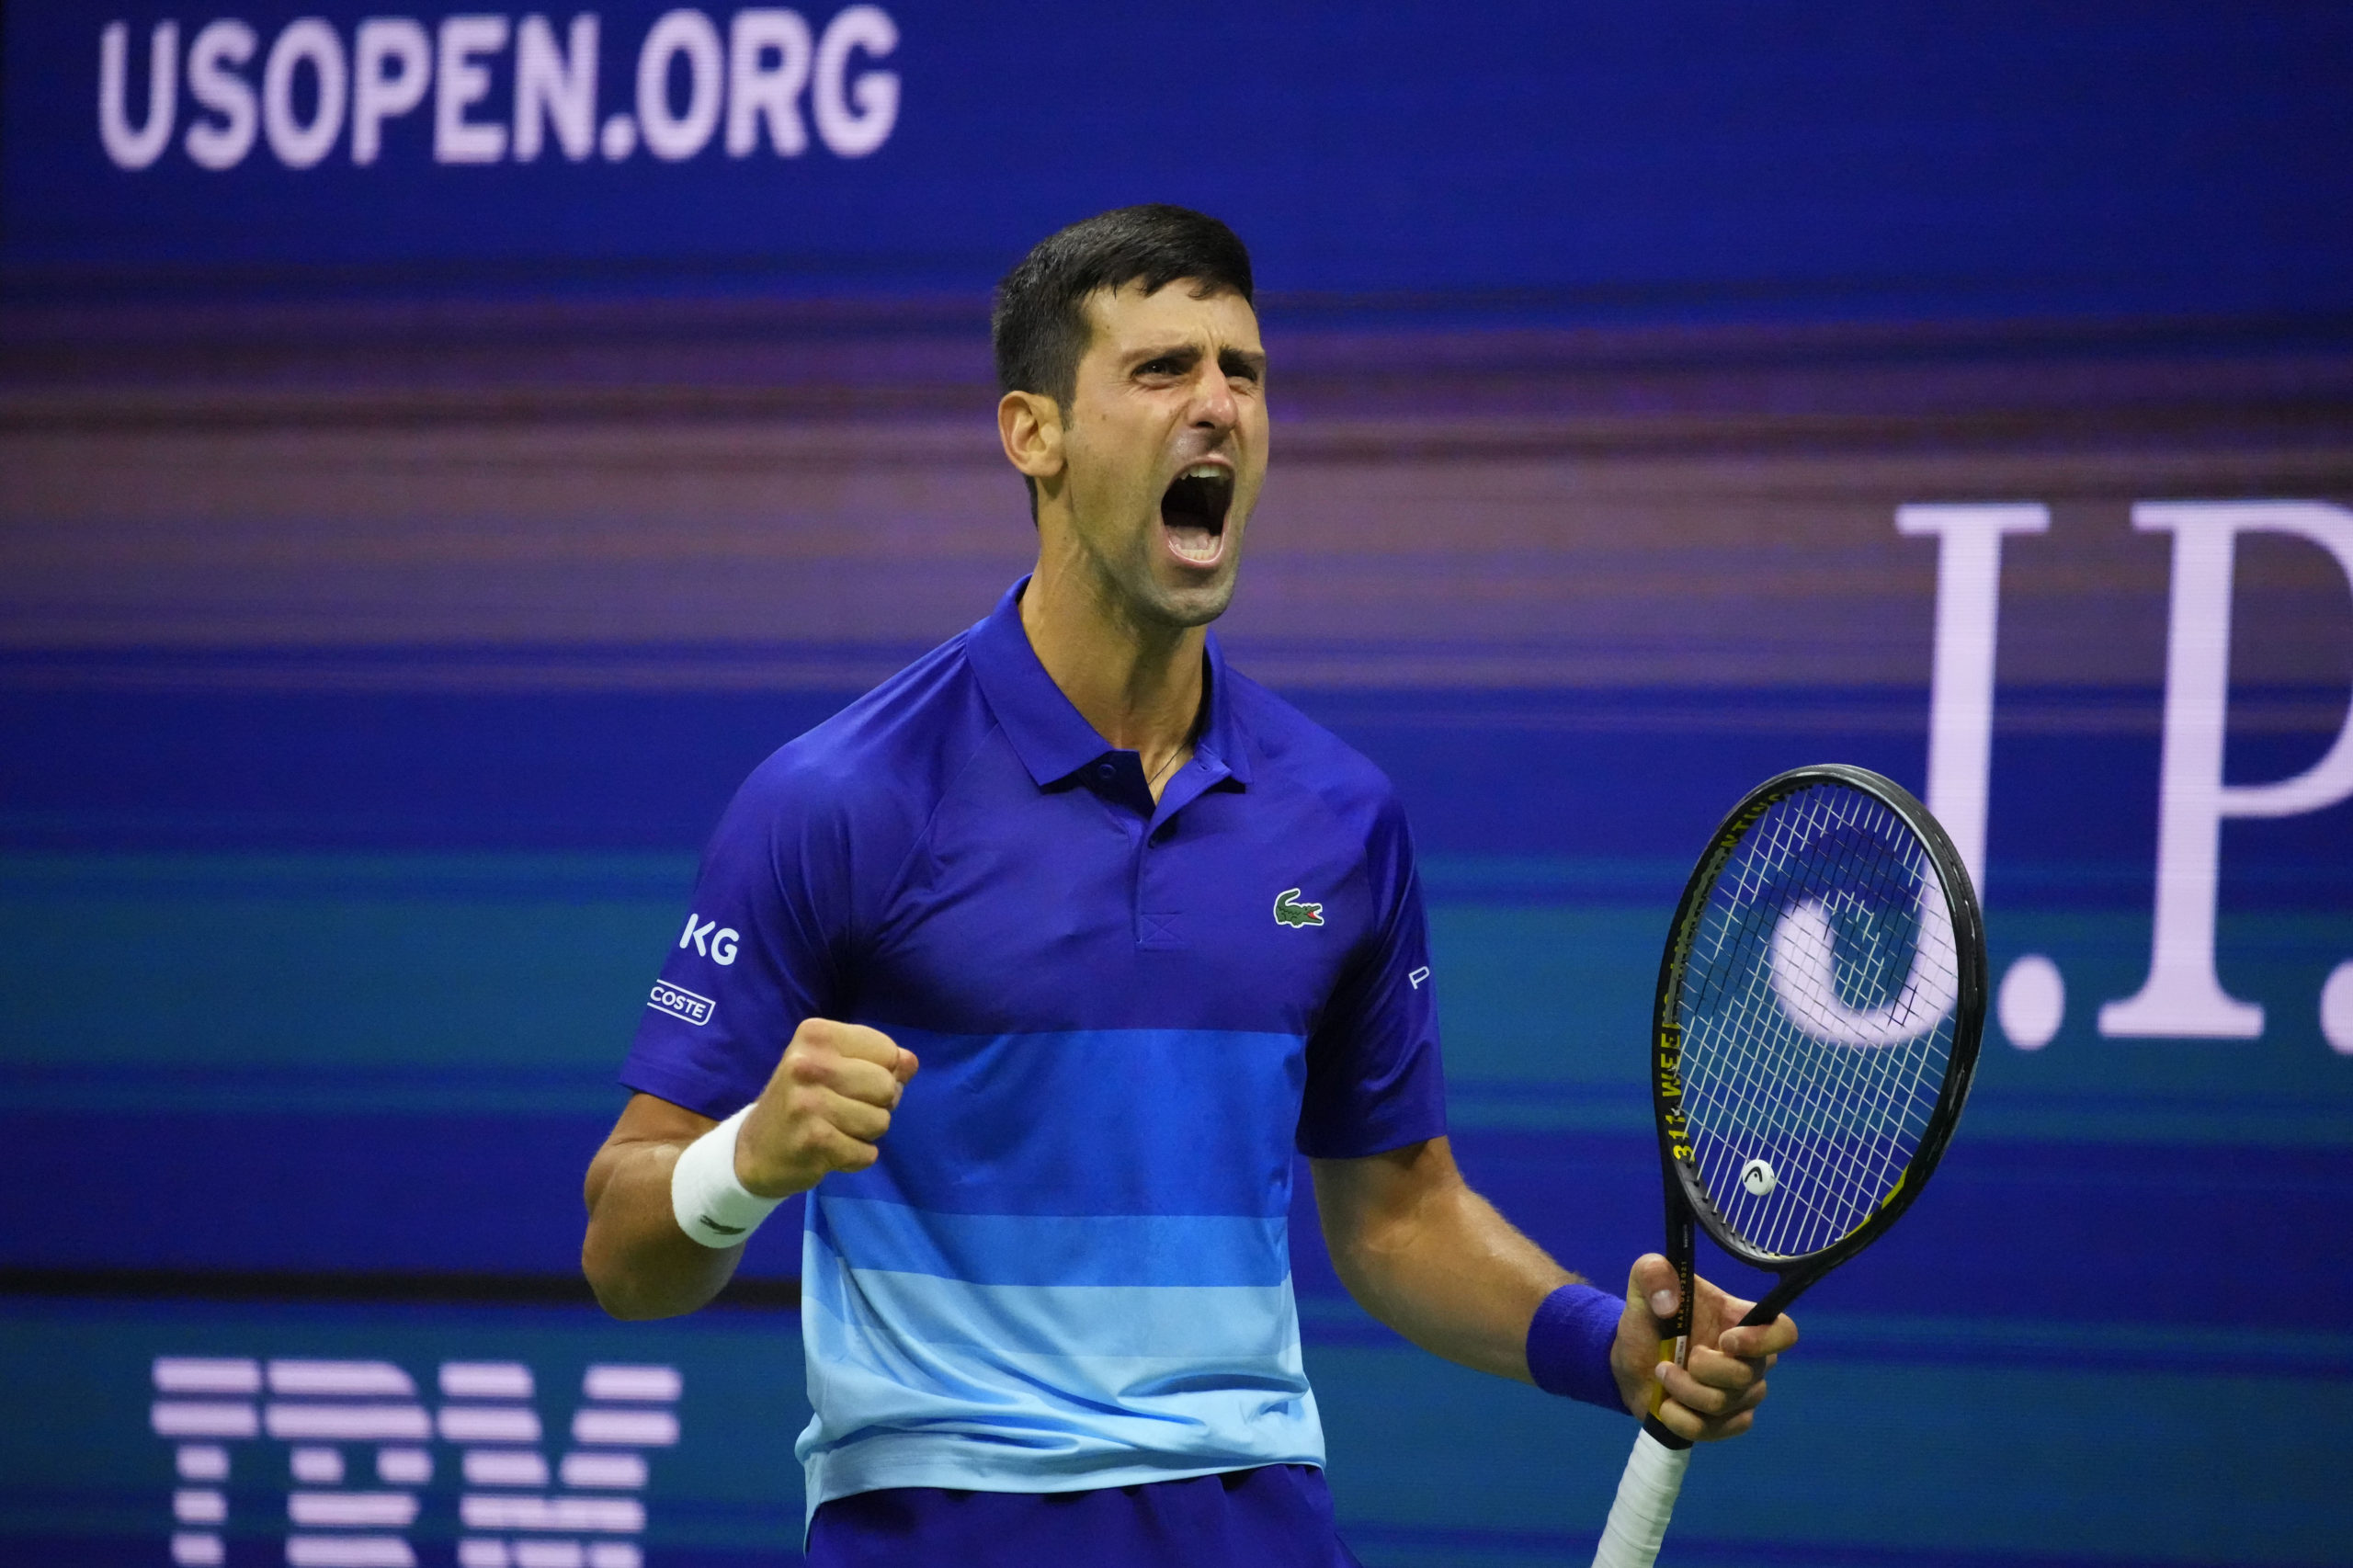 Novak Djokovic of Serbia reacts after winning a break point against Alexander Zverev of Germany (not pictured) in the fifth set on day twelve of the 2021 U.S. Open tennis 